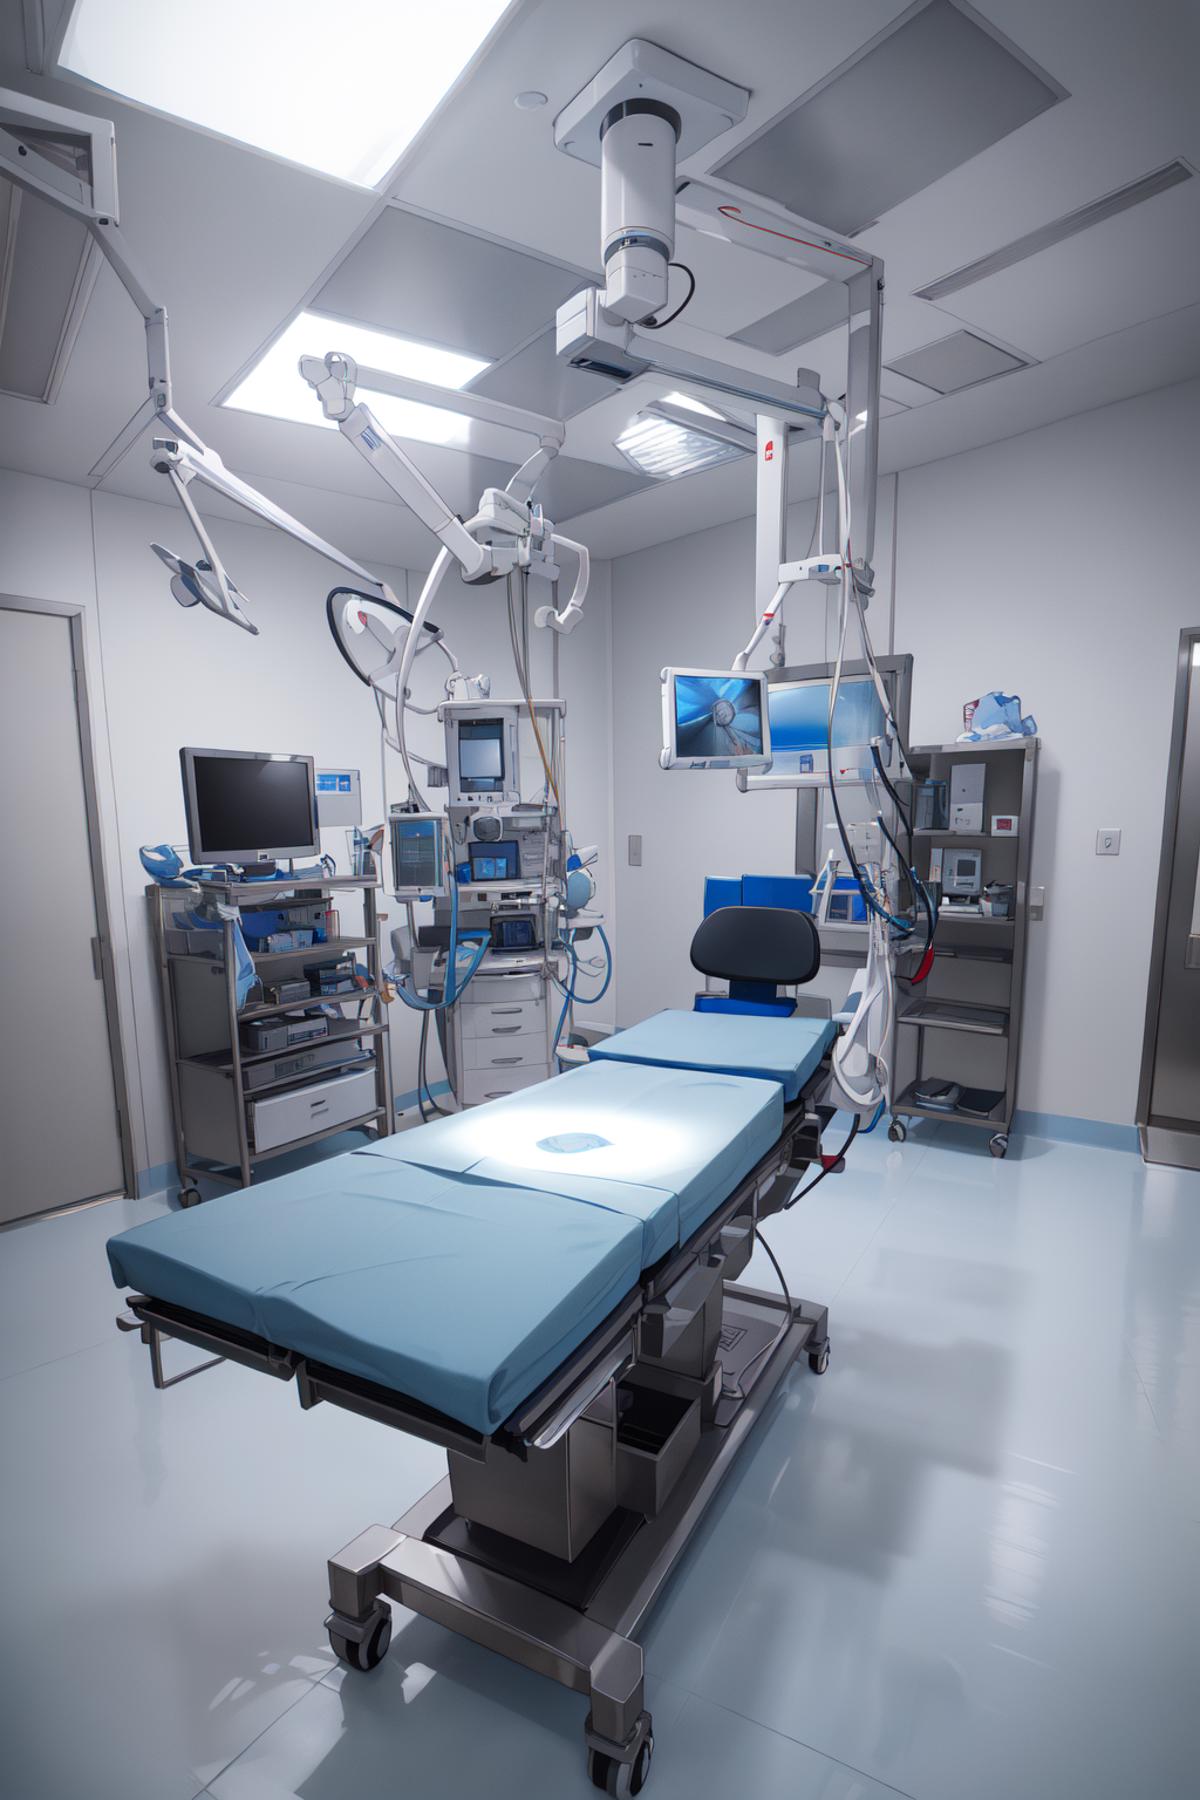 Modern Operating Room image by phageoussurgery439